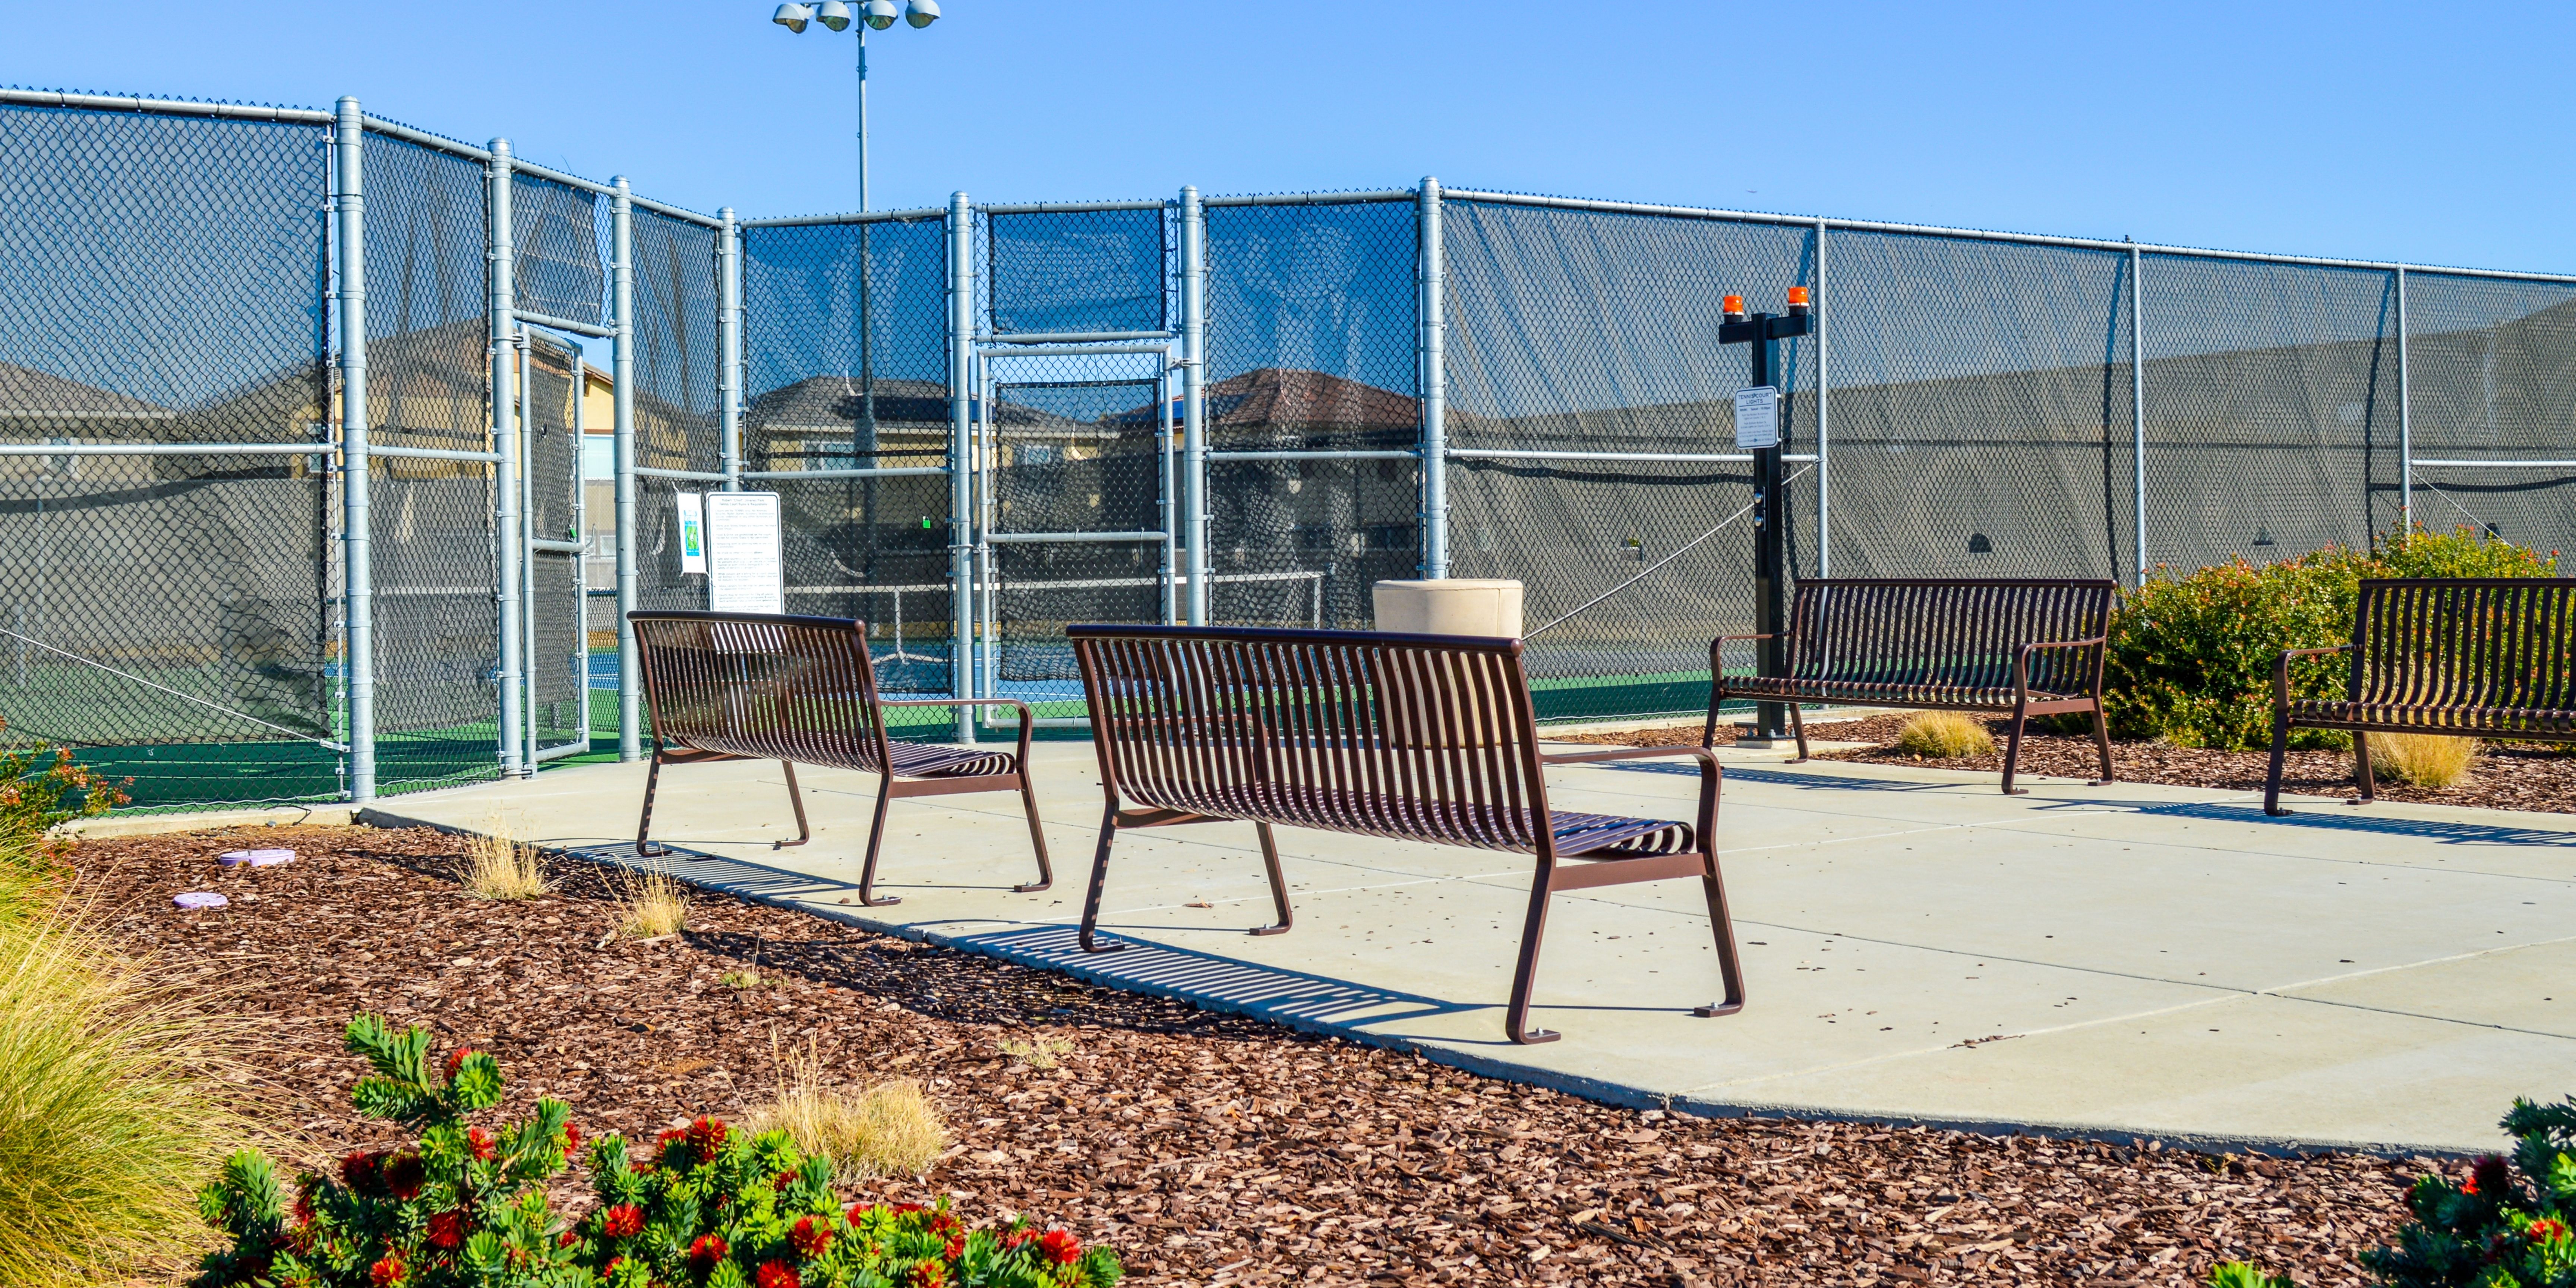 Park bench and tennis court on sunny day